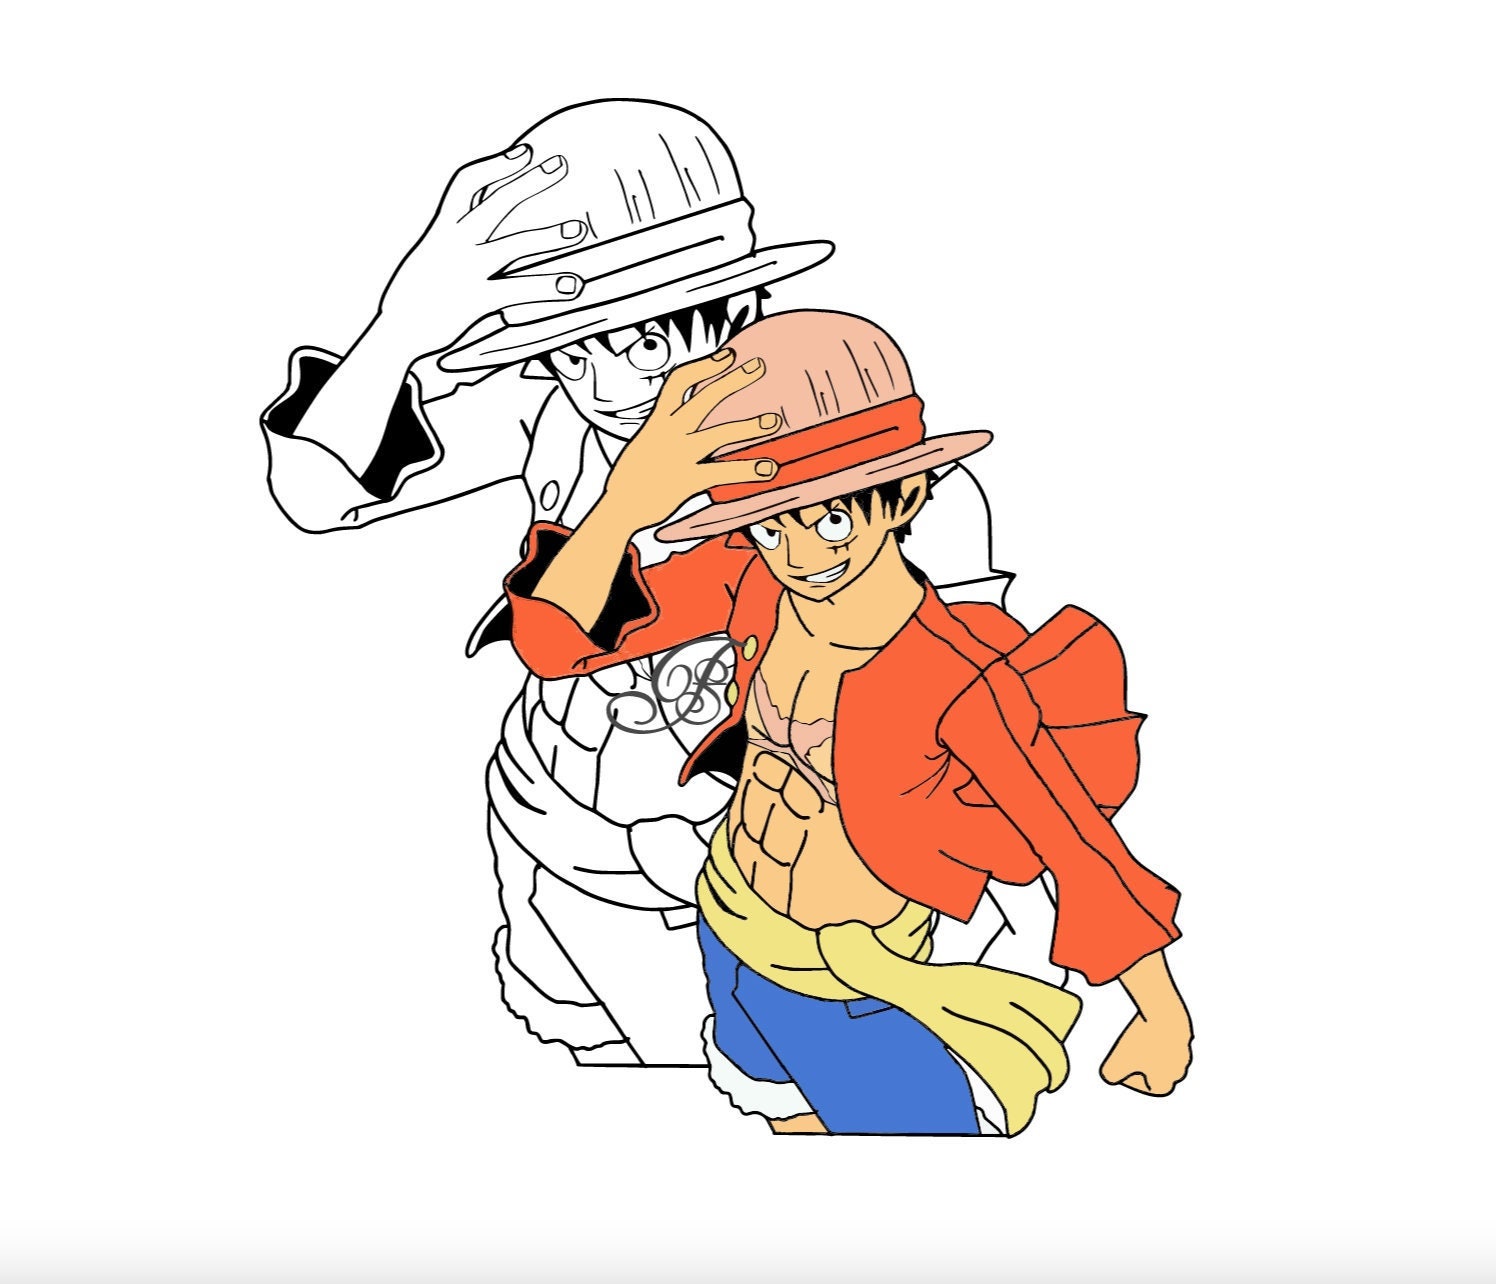 ONE PIECE CHIBI PROJECT on X: Monkey D. Luffy New Card Design